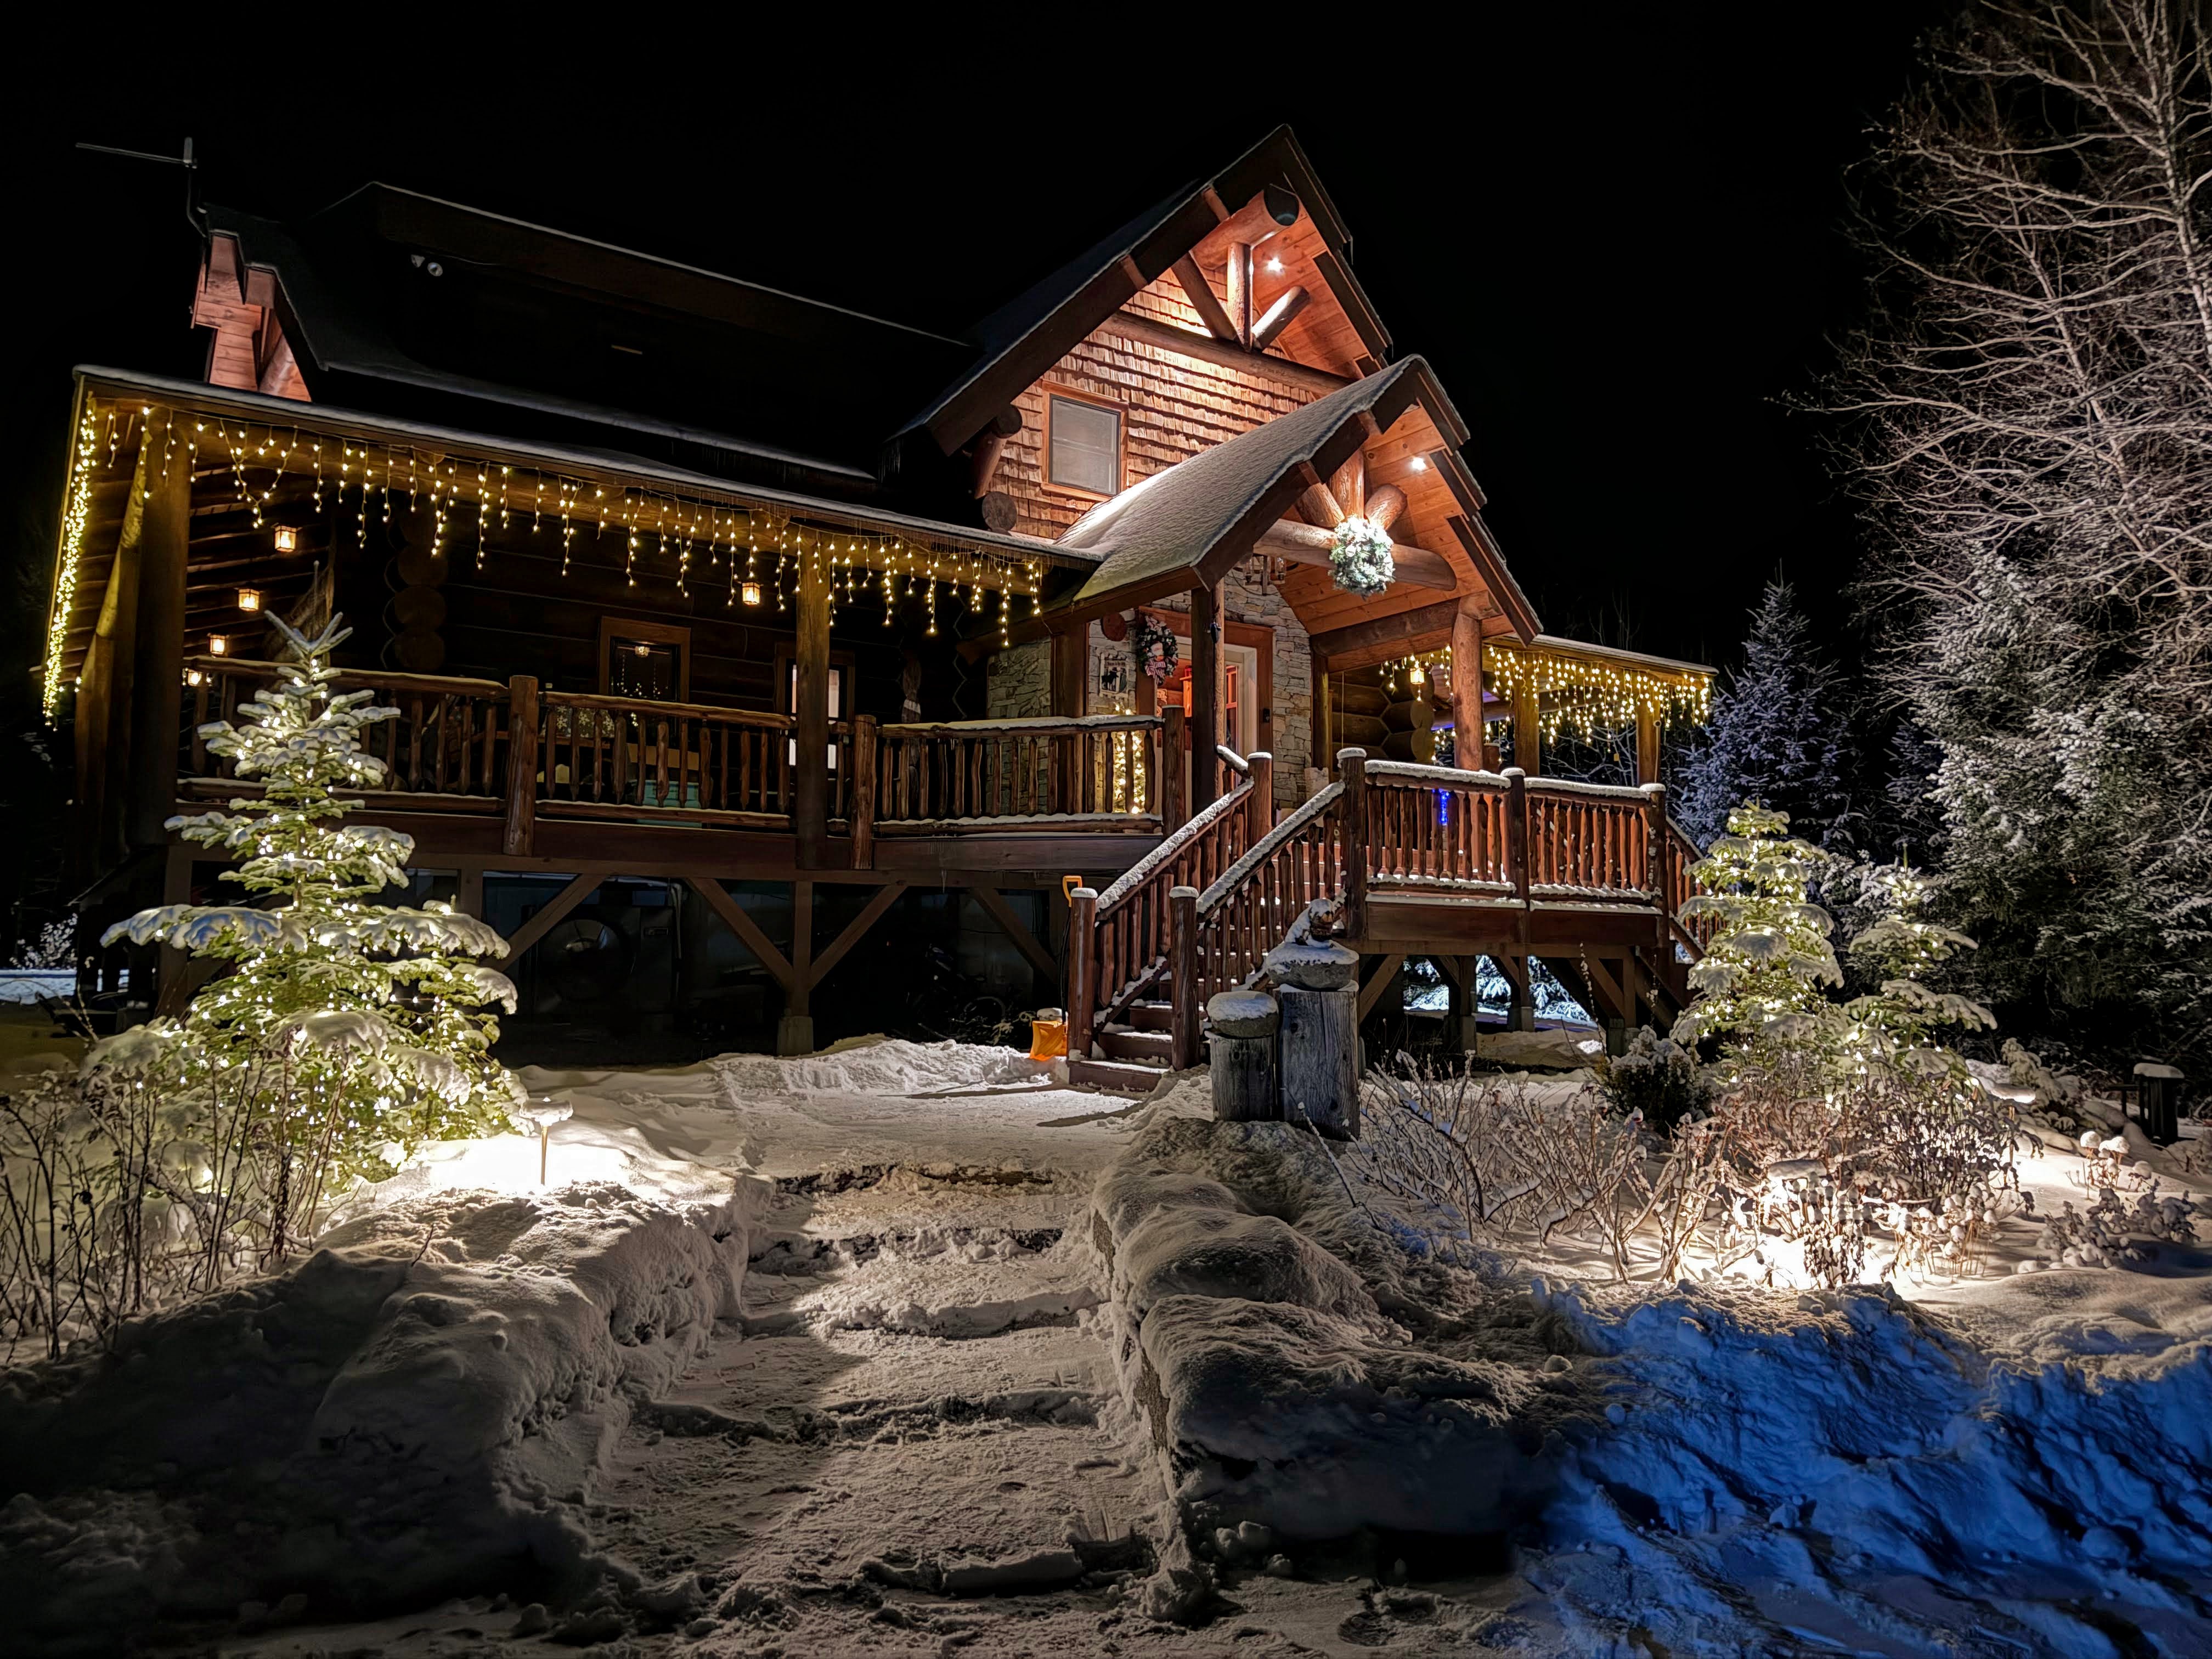 Property Image 2 - WML stunning log home in Bretton Woods, AC, 2-person Jacuzzi, indoor and outdoor fireplaces, & more!